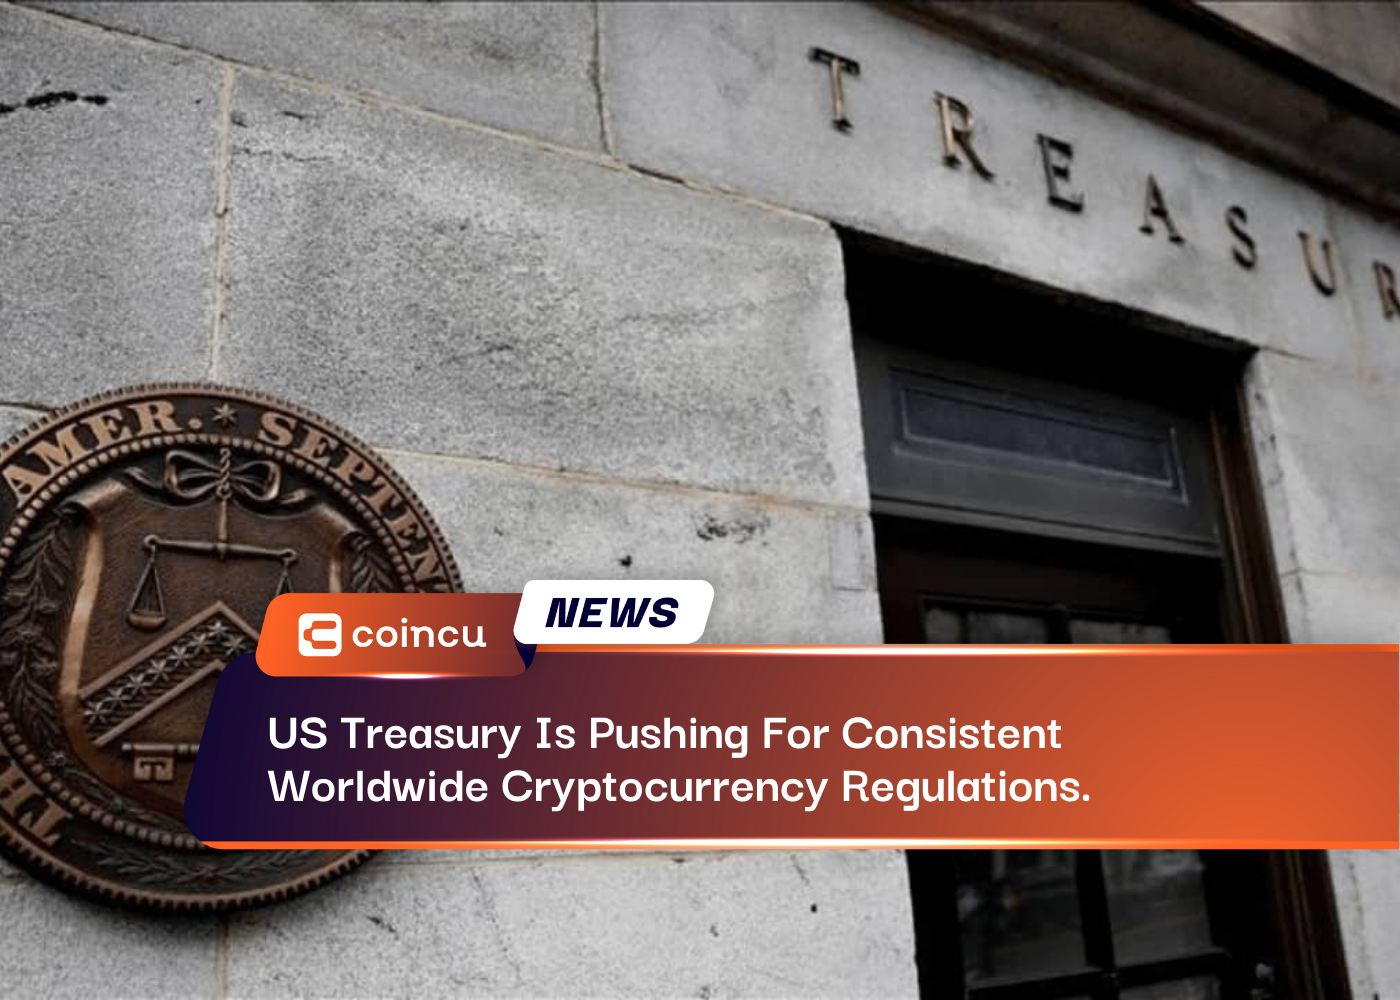 US Treasury Is Pushing For Consistent Worldwide Cryptocurrency Regulations.